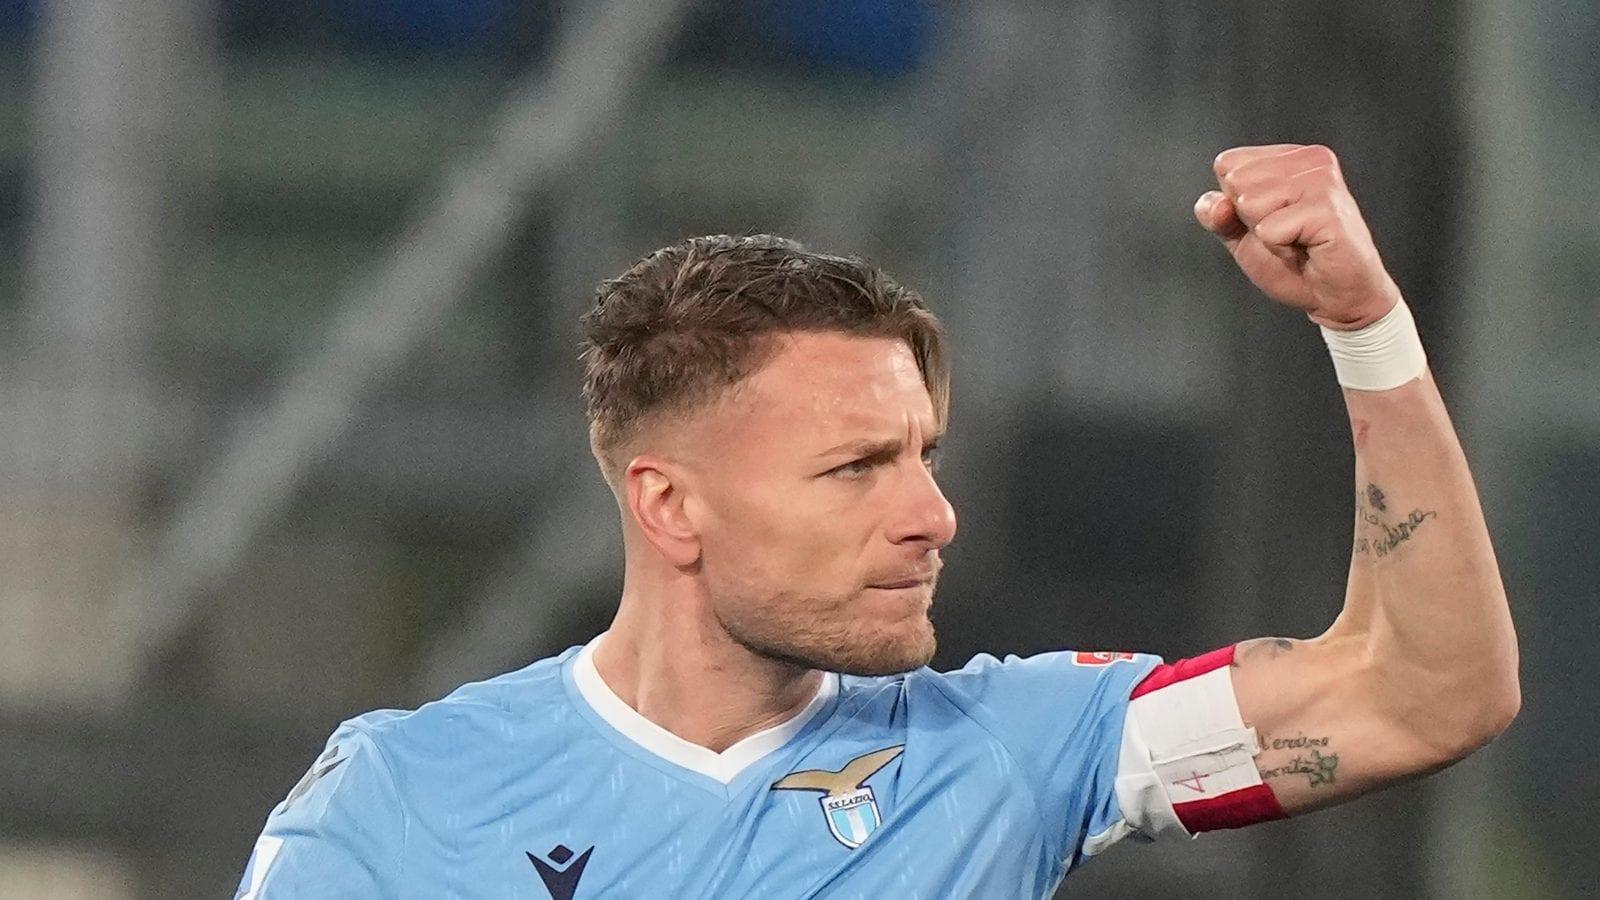 Ciro Immobile became Lazio’s all-time leading goalscorer after his heroics this season